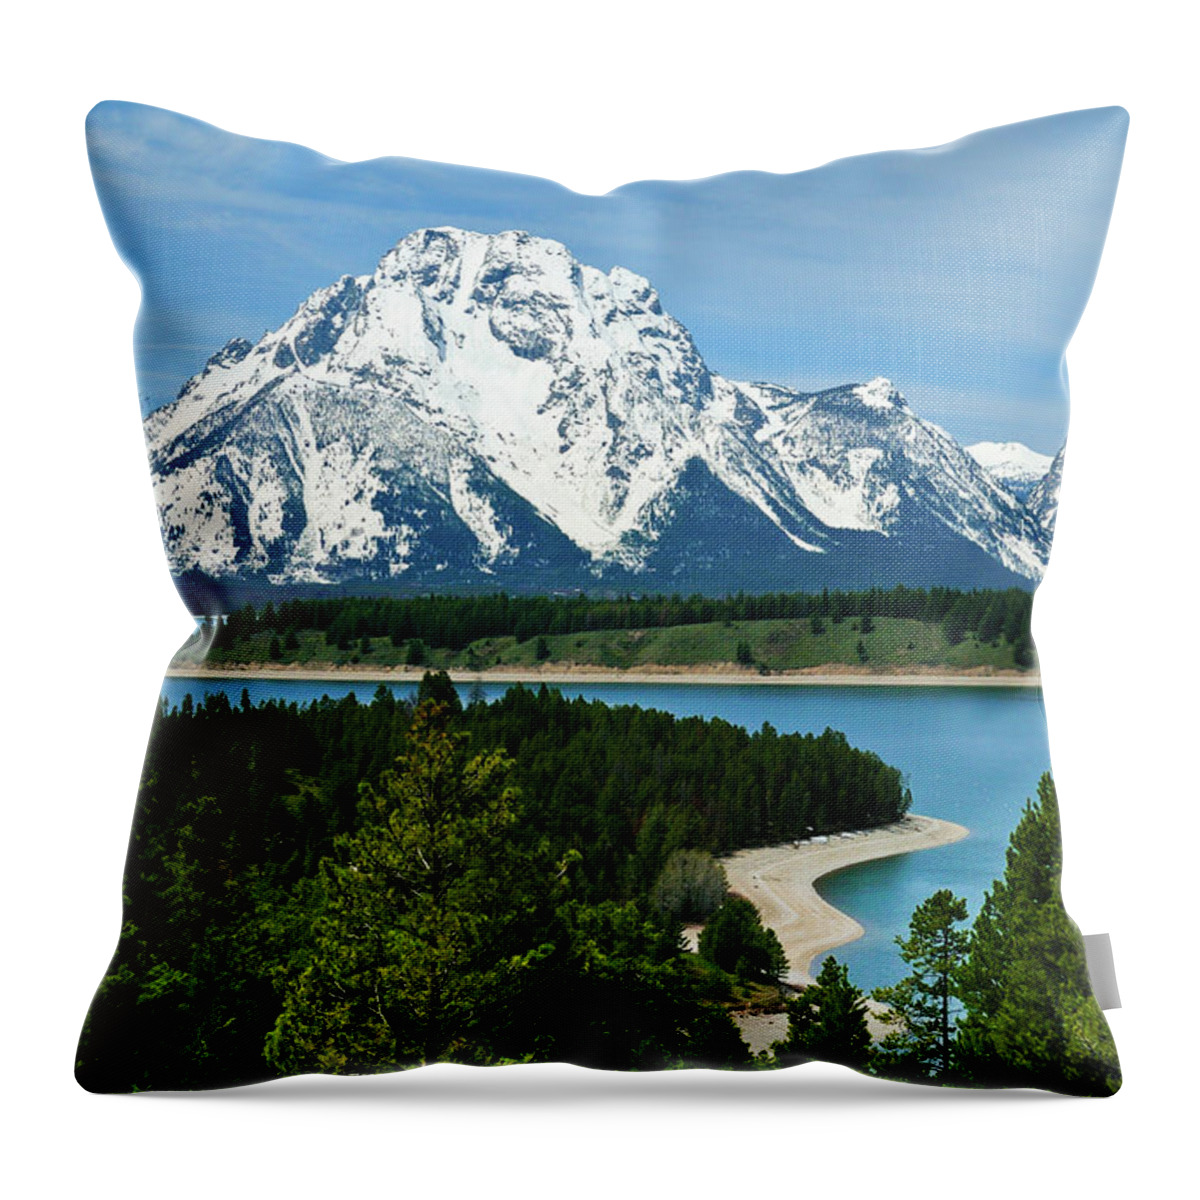 Grand Teton National Park Throw Pillow featuring the photograph Teton Spring by Greg Norrell